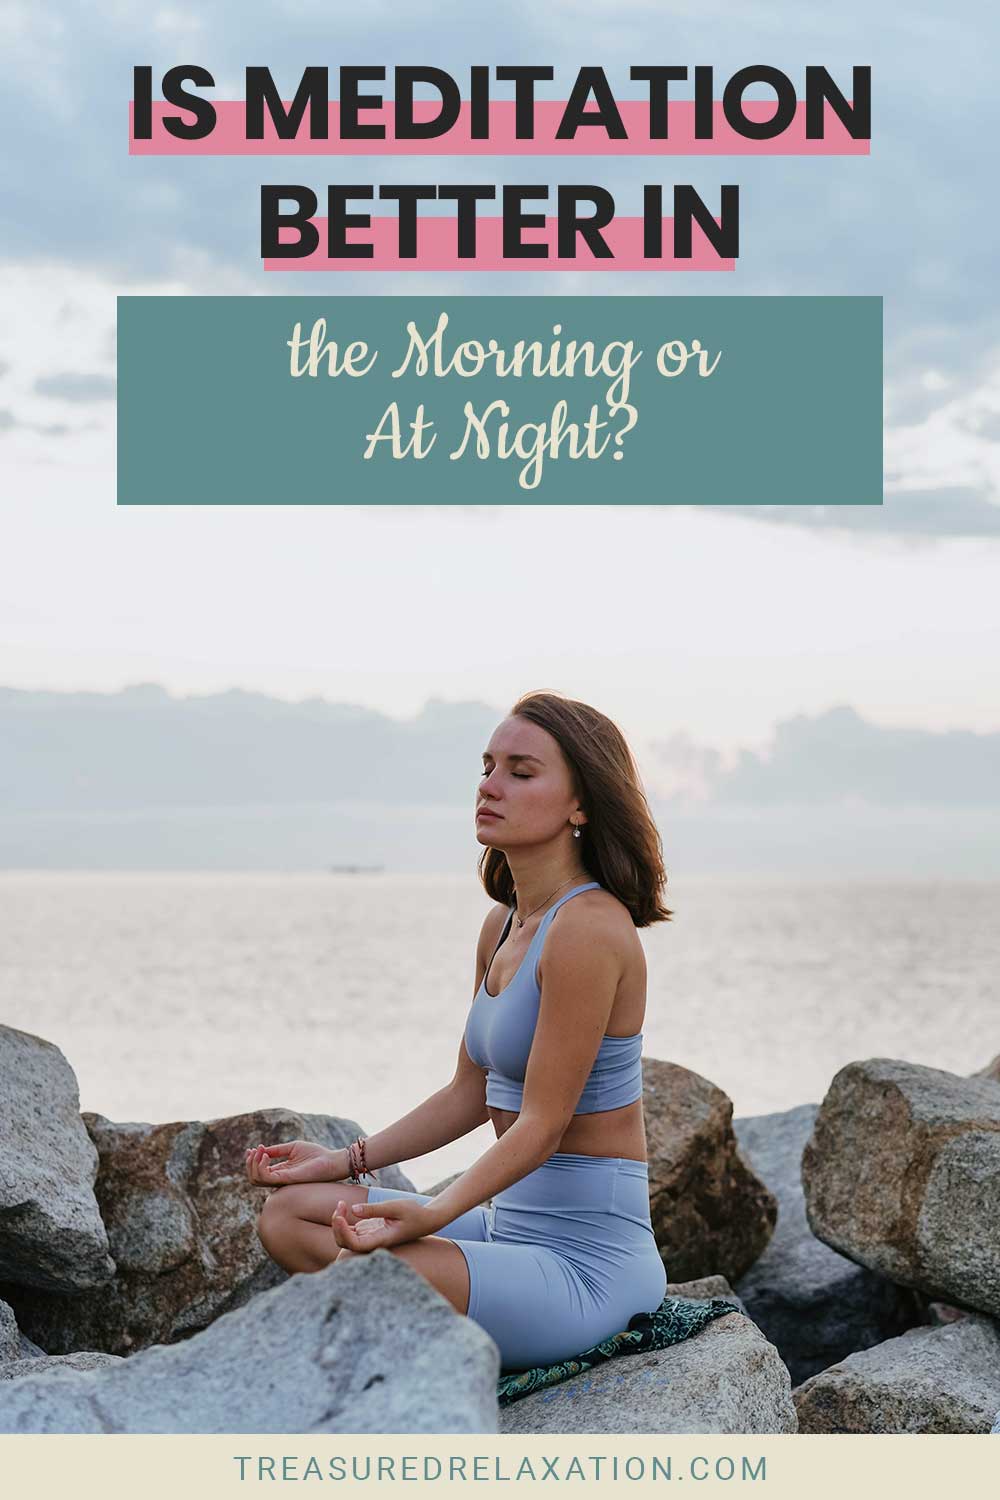 Is Meditation Better in the Morning or At Night?